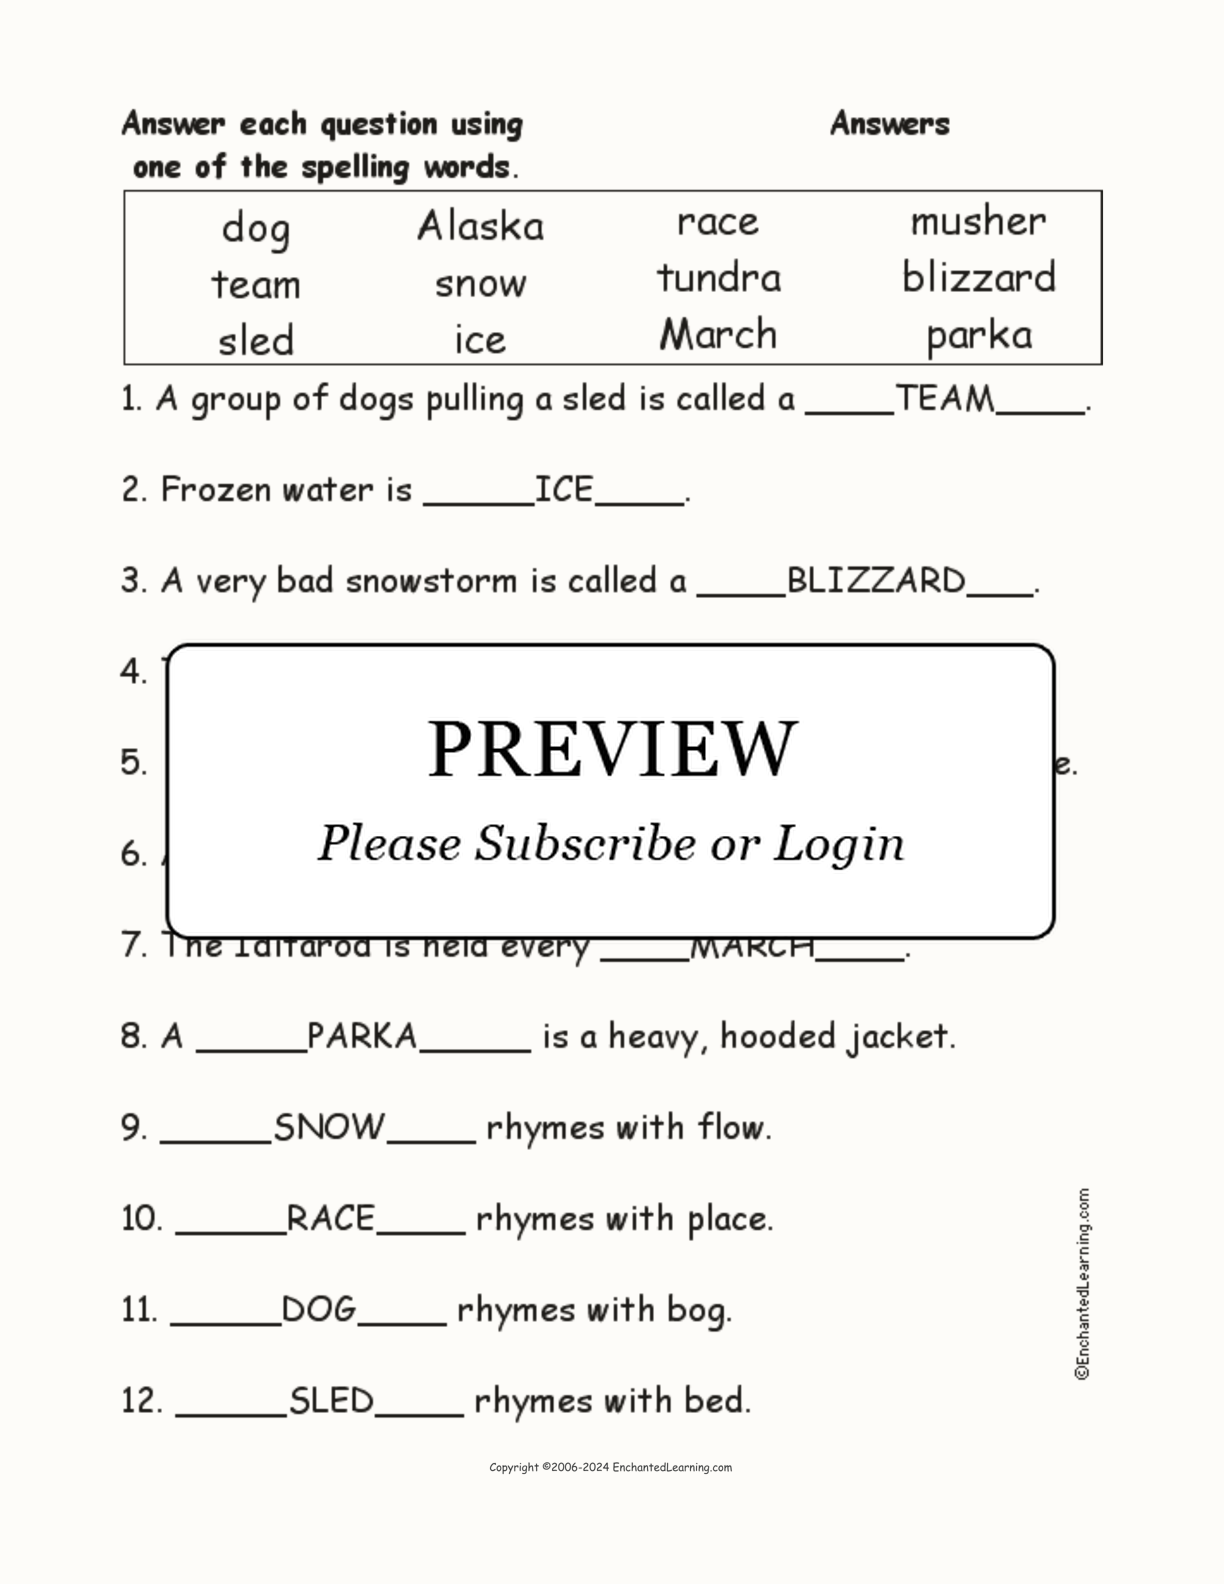 Iditarod Dog Sled Race: Spelling Questions interactive worksheet page 2